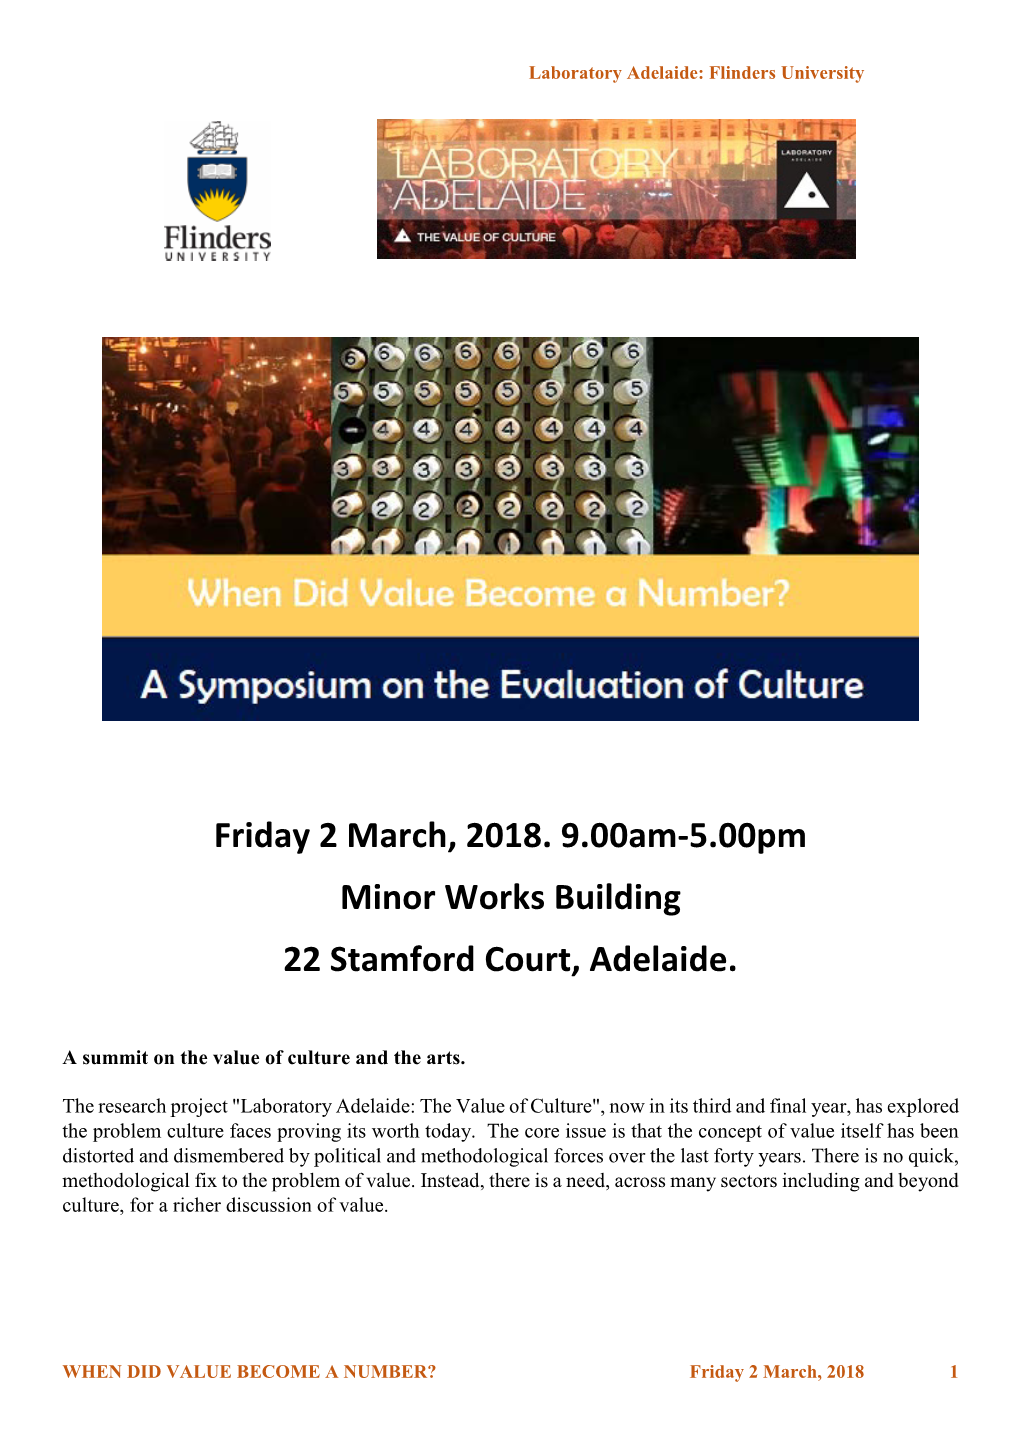 Friday 2 March, 2018. 9.00Am-5.00Pm Minor Works Building 22 Stamford Court, Adelaide